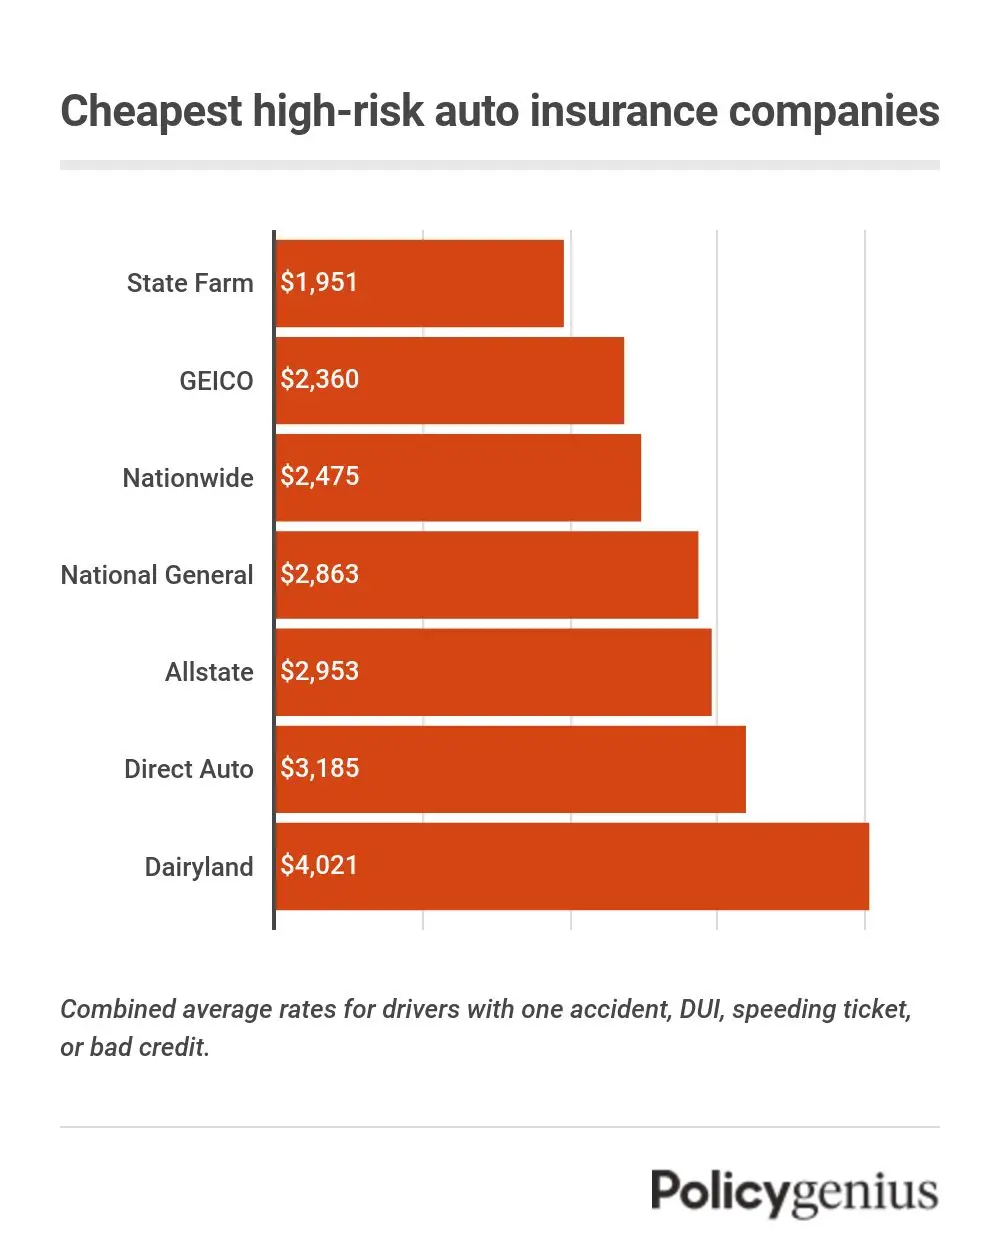 A bar graph of the cheapest car insurance companies for high-risk drivers